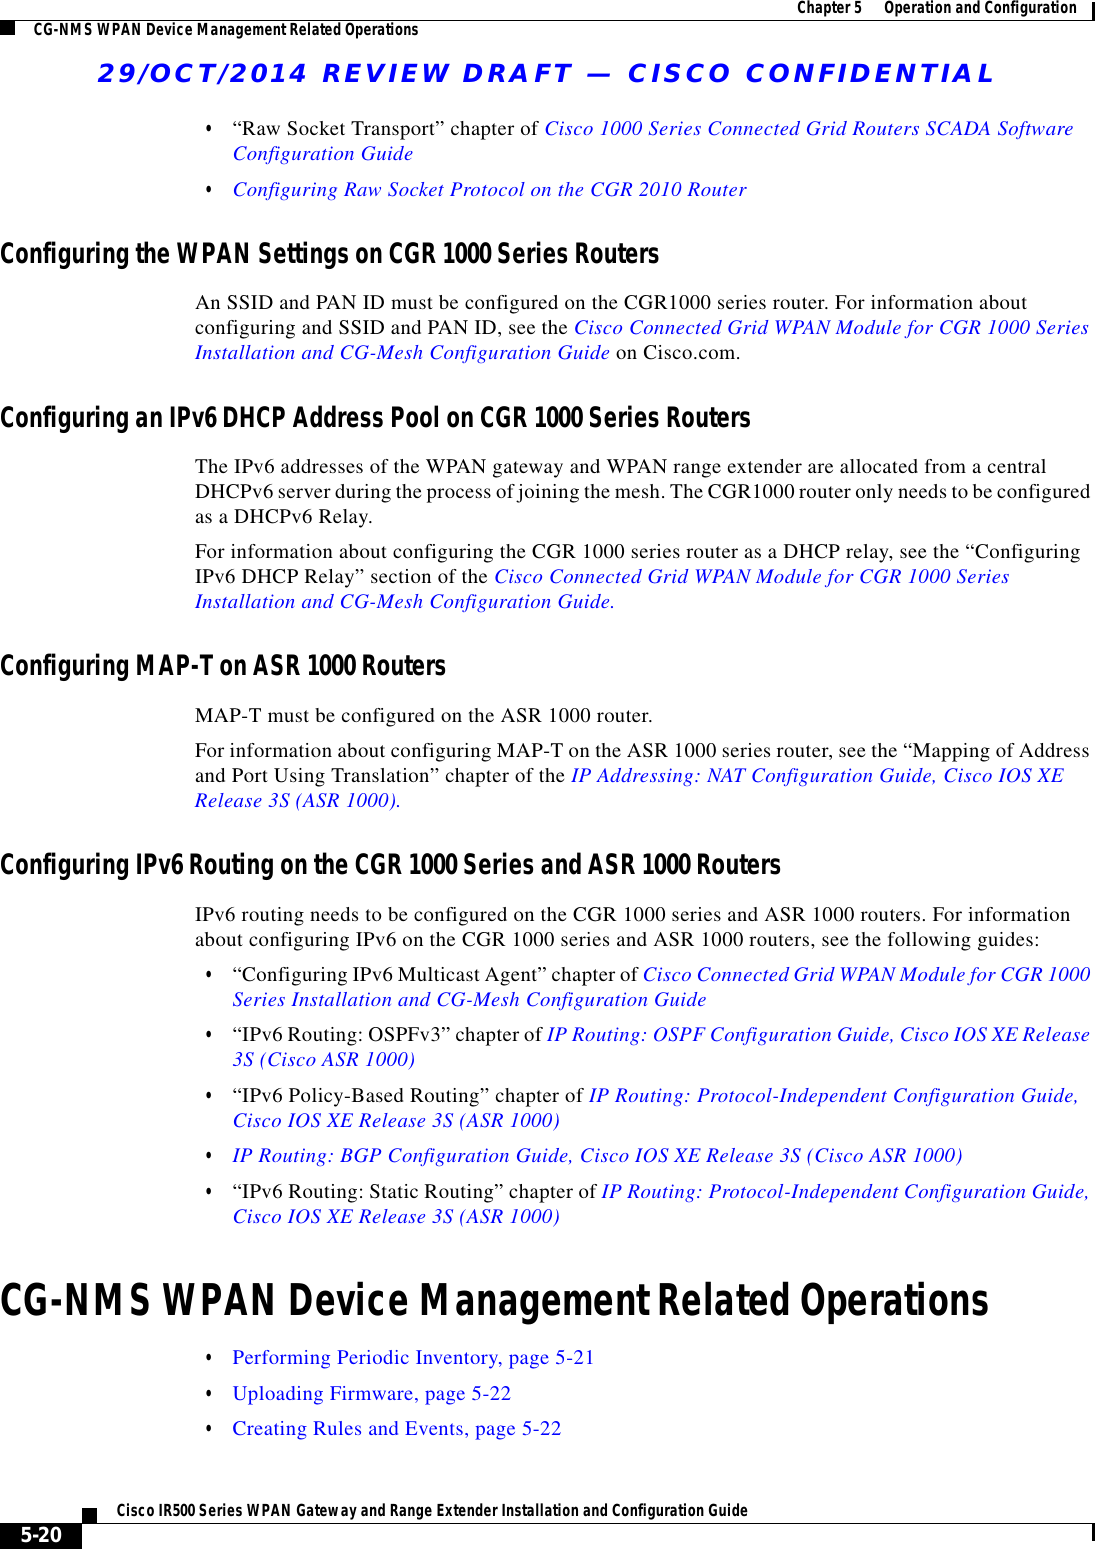 29/OCT/2014 REVIEW DRAFT — CISCO CONFIDENTIAL5-20Cisco IR500 Series WPAN Gateway and Range Extender Installation and Configuration Guide  Chapter 5      Operation and Configuration CG-NMS WPAN Device Management Related Operations  • “Raw Socket Transport” chapter of Cisco 1000 Series Connected Grid Routers SCADA Software Configuration Guide  • Configuring Raw Socket Protocol on the CGR 2010 RouterConfiguring the WPAN Settings on CGR 1000 Series RoutersAn SSID and PAN ID must be configured on the CGR1000 series router. For information about configuring and SSID and PAN ID, see the Cisco Connected Grid WPAN Module for CGR 1000 Series Installation and CG-Mesh Configuration Guide on Cisco.com.Configuring an IPv6 DHCP Address Pool on CGR 1000 Series RoutersThe IPv6 addresses of the WPAN gateway and WPAN range extender are allocated from a central DHCPv6 server during the process of joining the mesh. The CGR1000 router only needs to be configured as a DHCPv6 Relay.For information about configuring the CGR 1000 series router as a DHCP relay, see the “Configuring IPv6 DHCP Relay” section of the Cisco Connected Grid WPAN Module for CGR 1000 Series Installation and CG-Mesh Configuration Guide.Configuring MAP-T on ASR 1000 RoutersMAP-T must be configured on the ASR 1000 router.For information about configuring MAP-T on the ASR 1000 series router, see the “Mapping of Address and Port Using Translation” chapter of the IP Addressing: NAT Configuration Guide, Cisco IOS XE Release 3S (ASR 1000).Configuring IPv6 Routing on the CGR 1000 Series and ASR 1000 RoutersIPv6 routing needs to be configured on the CGR 1000 series and ASR 1000 routers. For information about configuring IPv6 on the CGR 1000 series and ASR 1000 routers, see the following guides:  • “Configuring IPv6 Multicast Agent” chapter of Cisco Connected Grid WPAN Module for CGR 1000 Series Installation and CG-Mesh Configuration Guide  • “IPv6 Routing: OSPFv3” chapter of IP Routing: OSPF Configuration Guide, Cisco IOS XE Release 3S (Cisco ASR 1000)  • “IPv6 Policy-Based Routing” chapter of IP Routing: Protocol-Independent Configuration Guide, Cisco IOS XE Release 3S (ASR 1000)  • IP Routing: BGP Configuration Guide, Cisco IOS XE Release 3S (Cisco ASR 1000)  • “IPv6 Routing: Static Routing” chapter of IP Routing: Protocol-Independent Configuration Guide, Cisco IOS XE Release 3S (ASR 1000)CG-NMS WPAN Device Management Related Operations  • Performing Periodic Inventory, page 5-21  • Uploading Firmware, page 5-22  • Creating Rules and Events, page 5-22